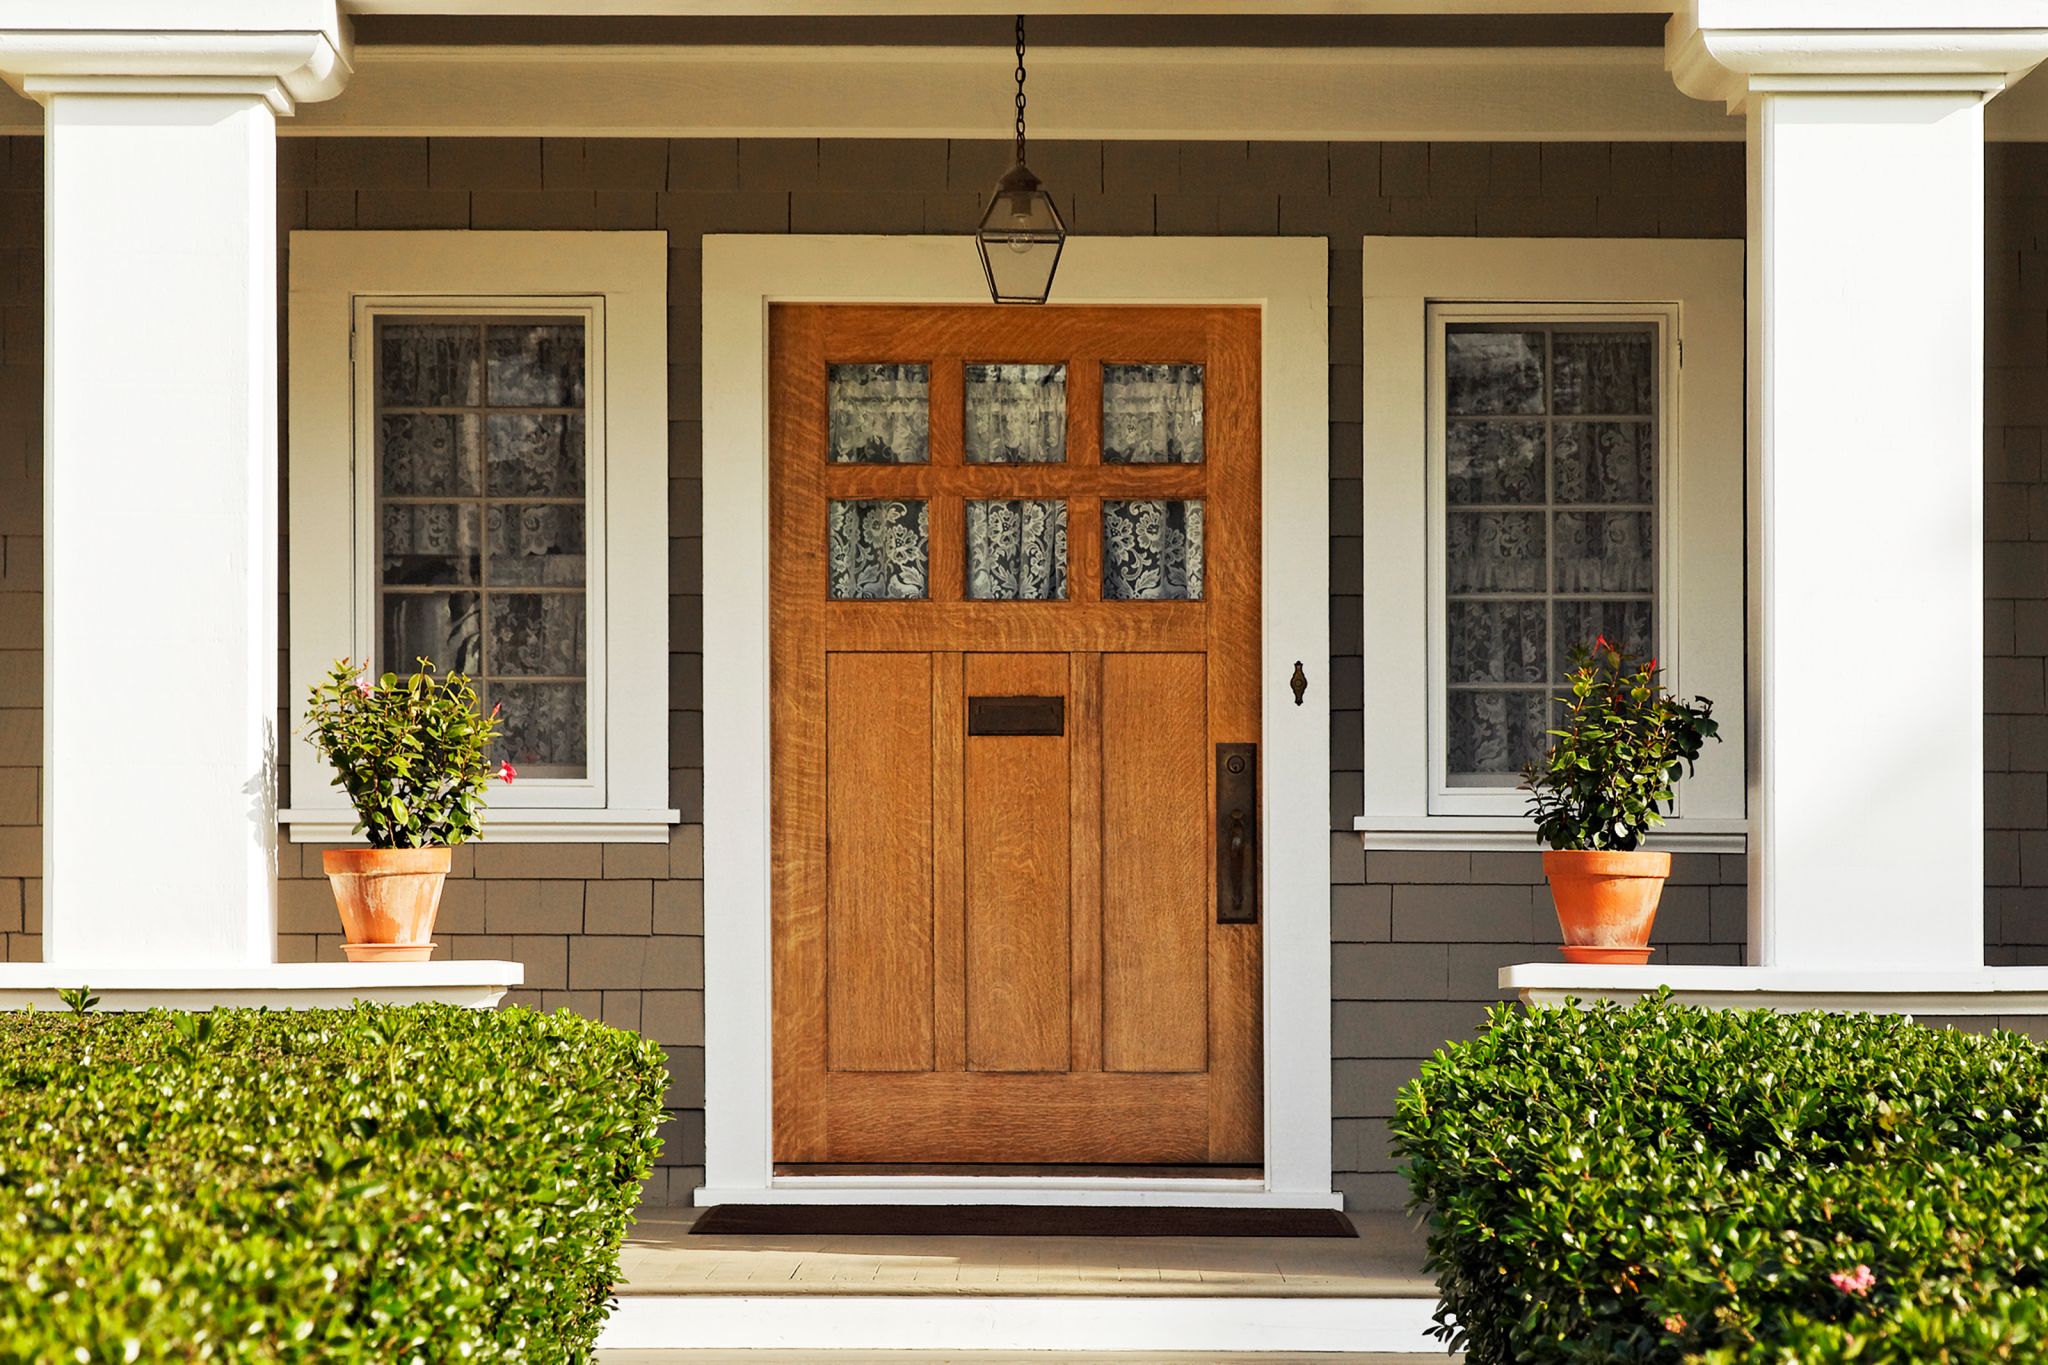 A concrete walkway bordered with hedged shrubs leads to the wooden front door of a craftsman style home with taupe shaker siding and large white columns and windows on either side of the door